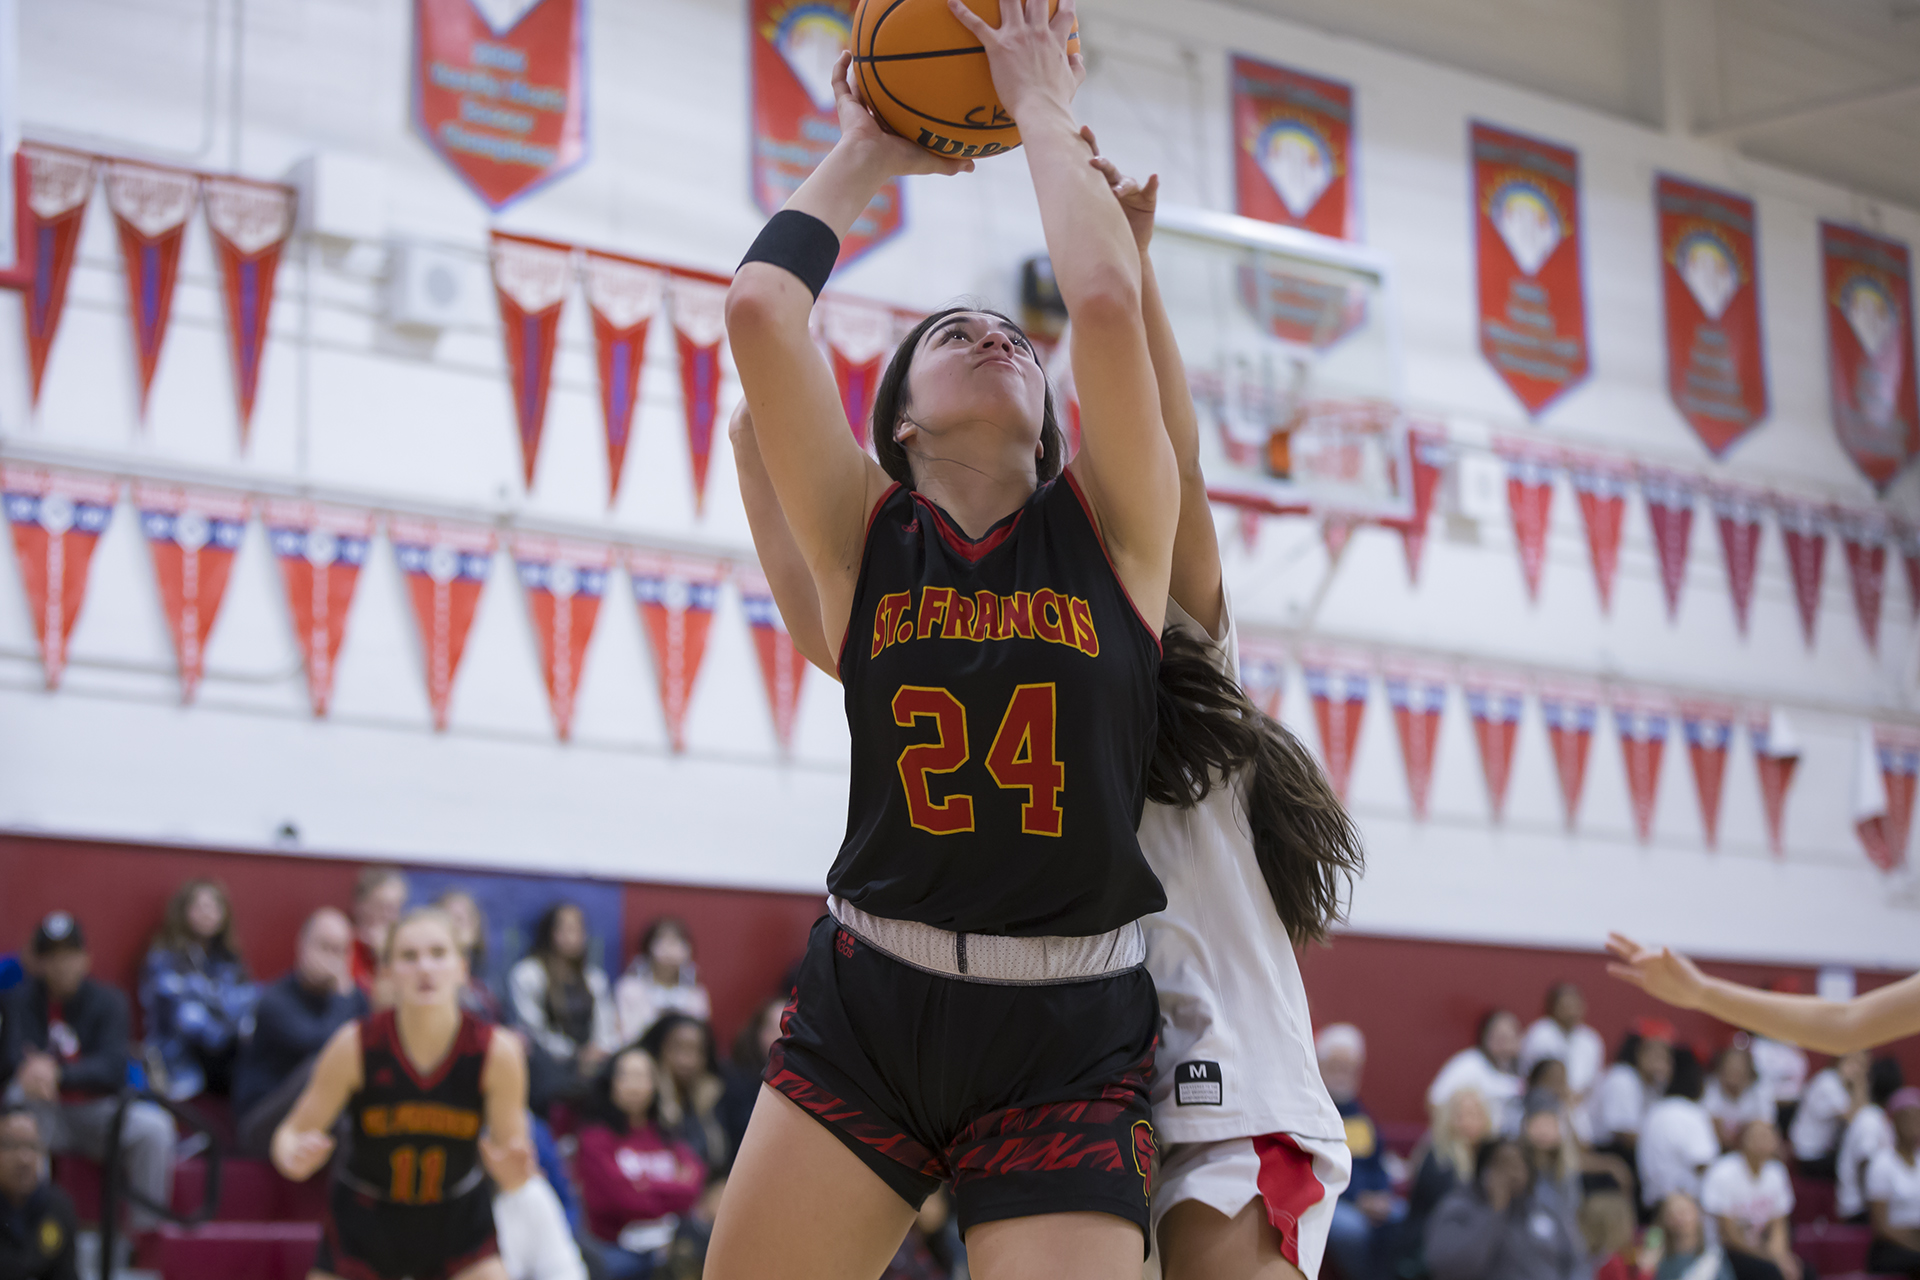 JV Gold falls to McClatchy in Tuesday's road doubleheader